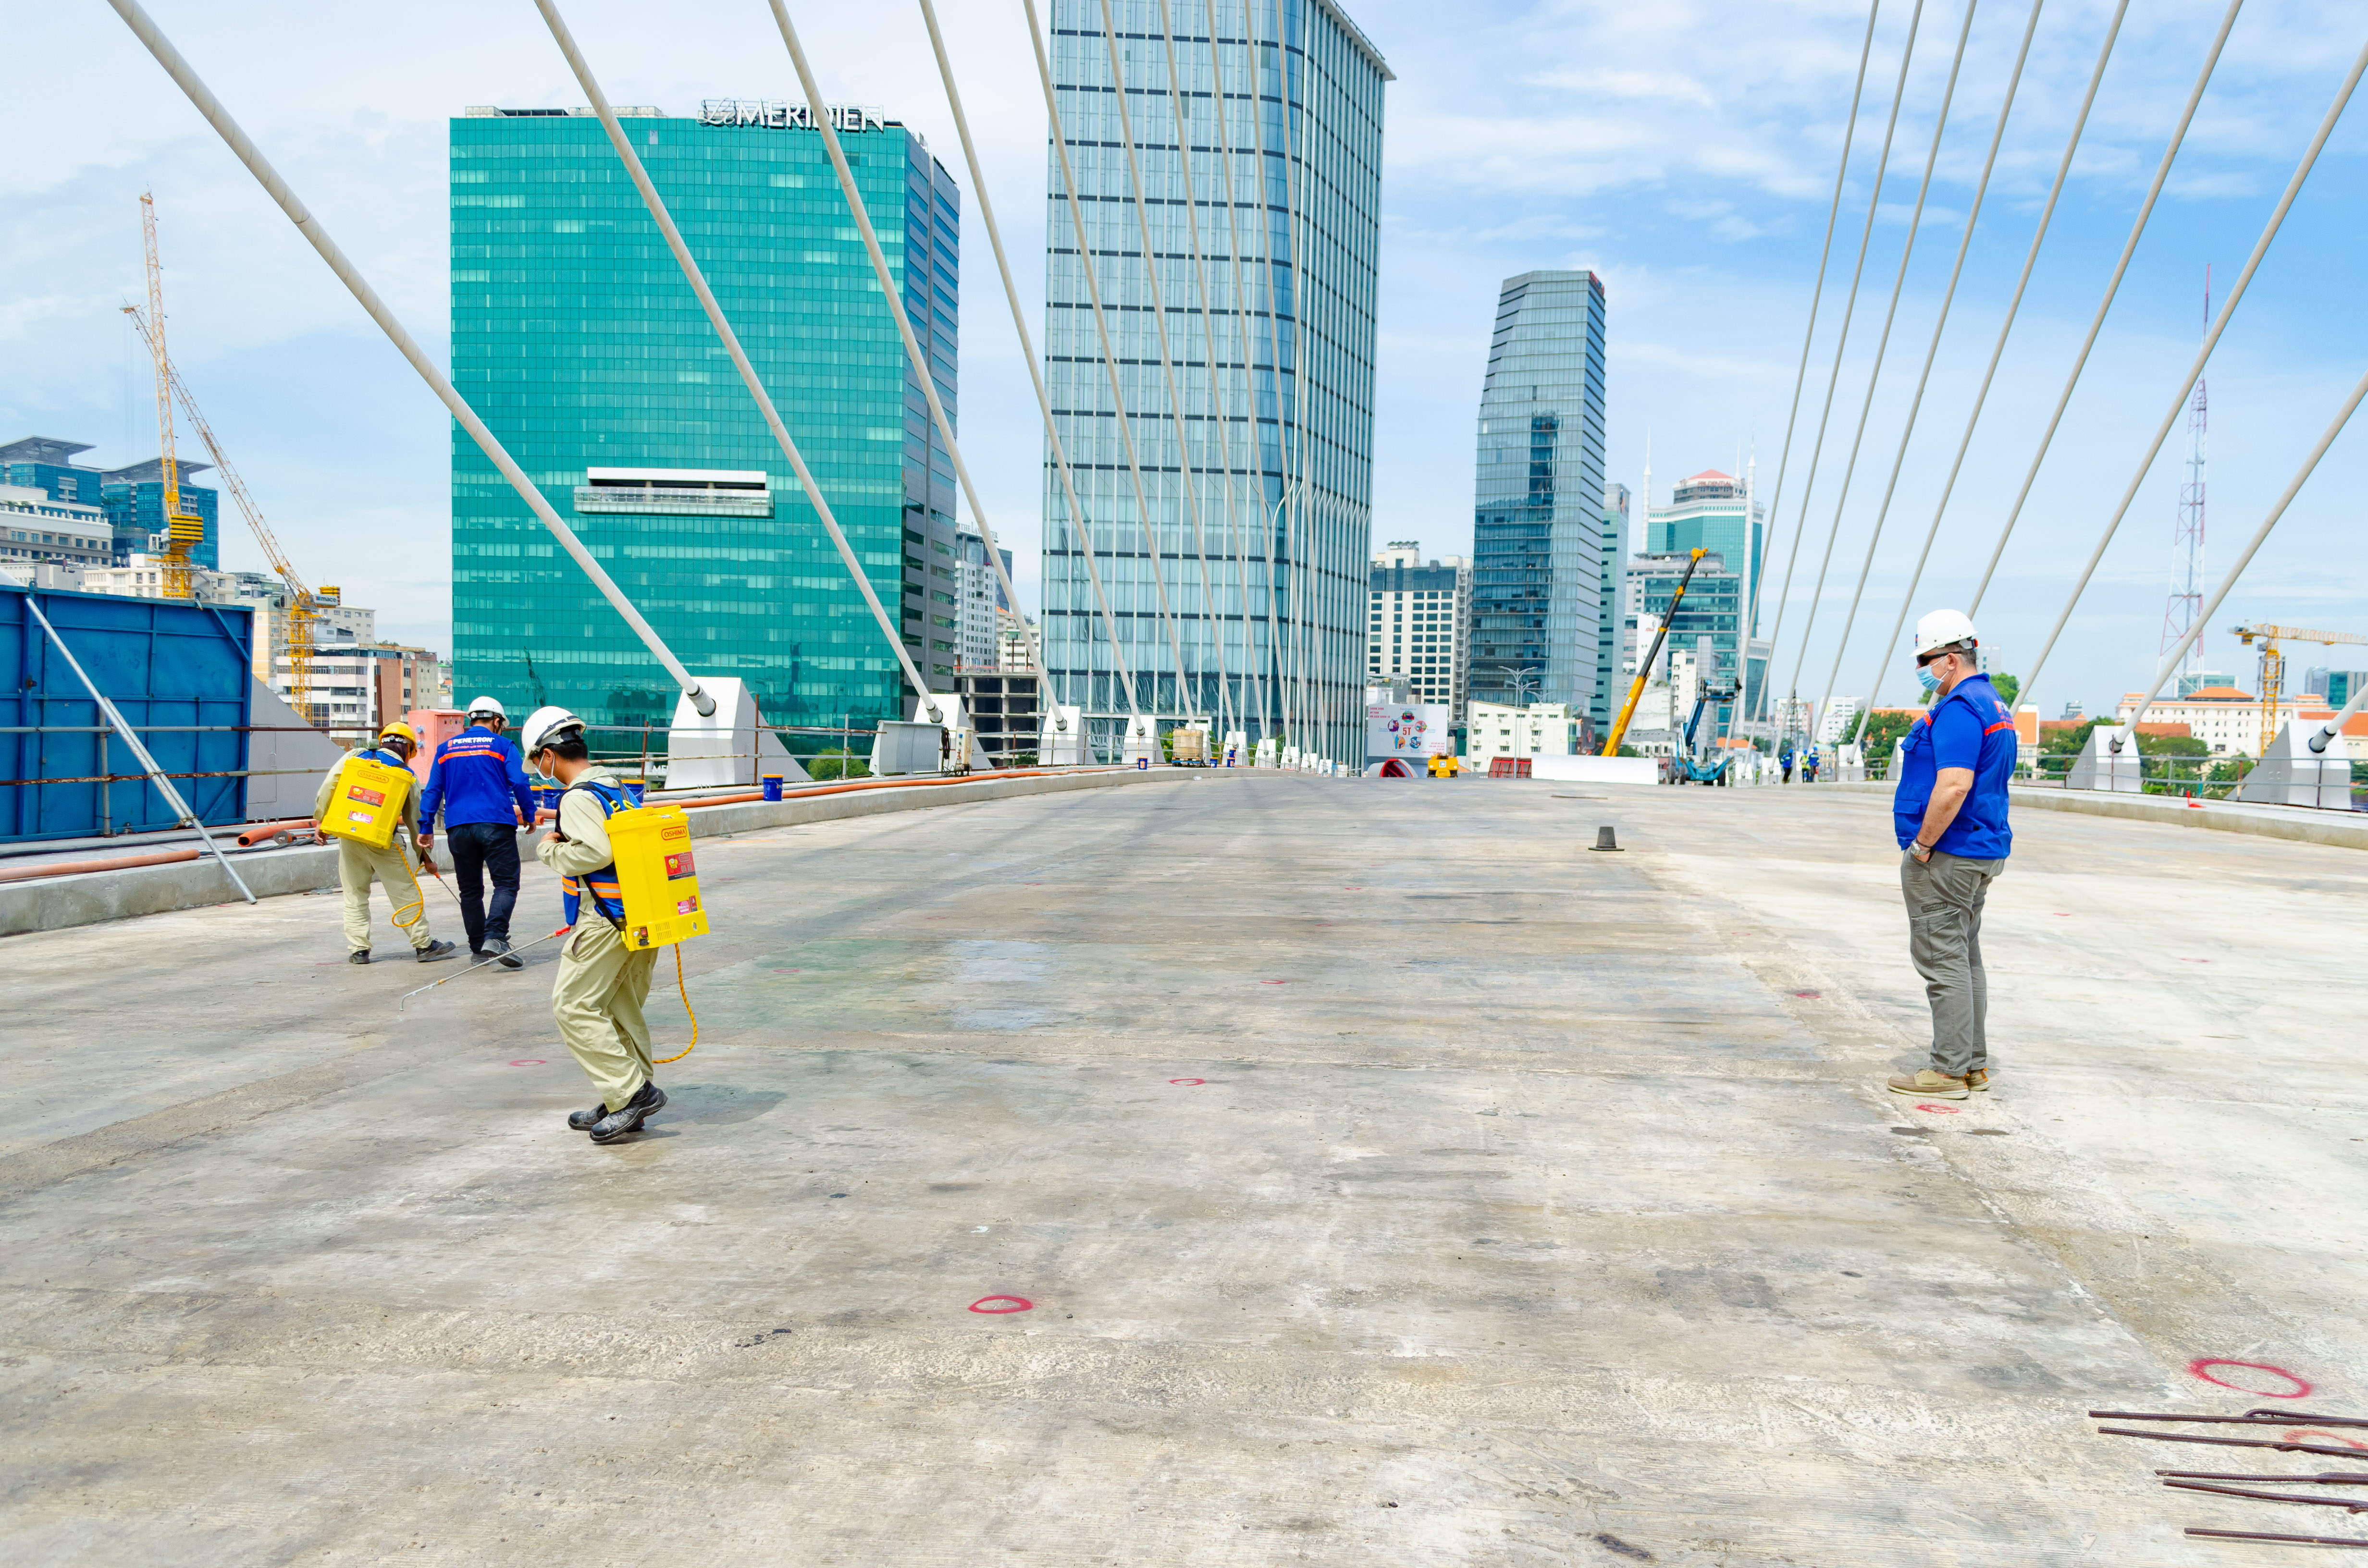 Ensuring proper application: PENESEAL PRO was applied to over 22,000 m2 of the Thủ Thiêm Bridge deck, where the Penetron Vietnam technical support team provided on-site support.